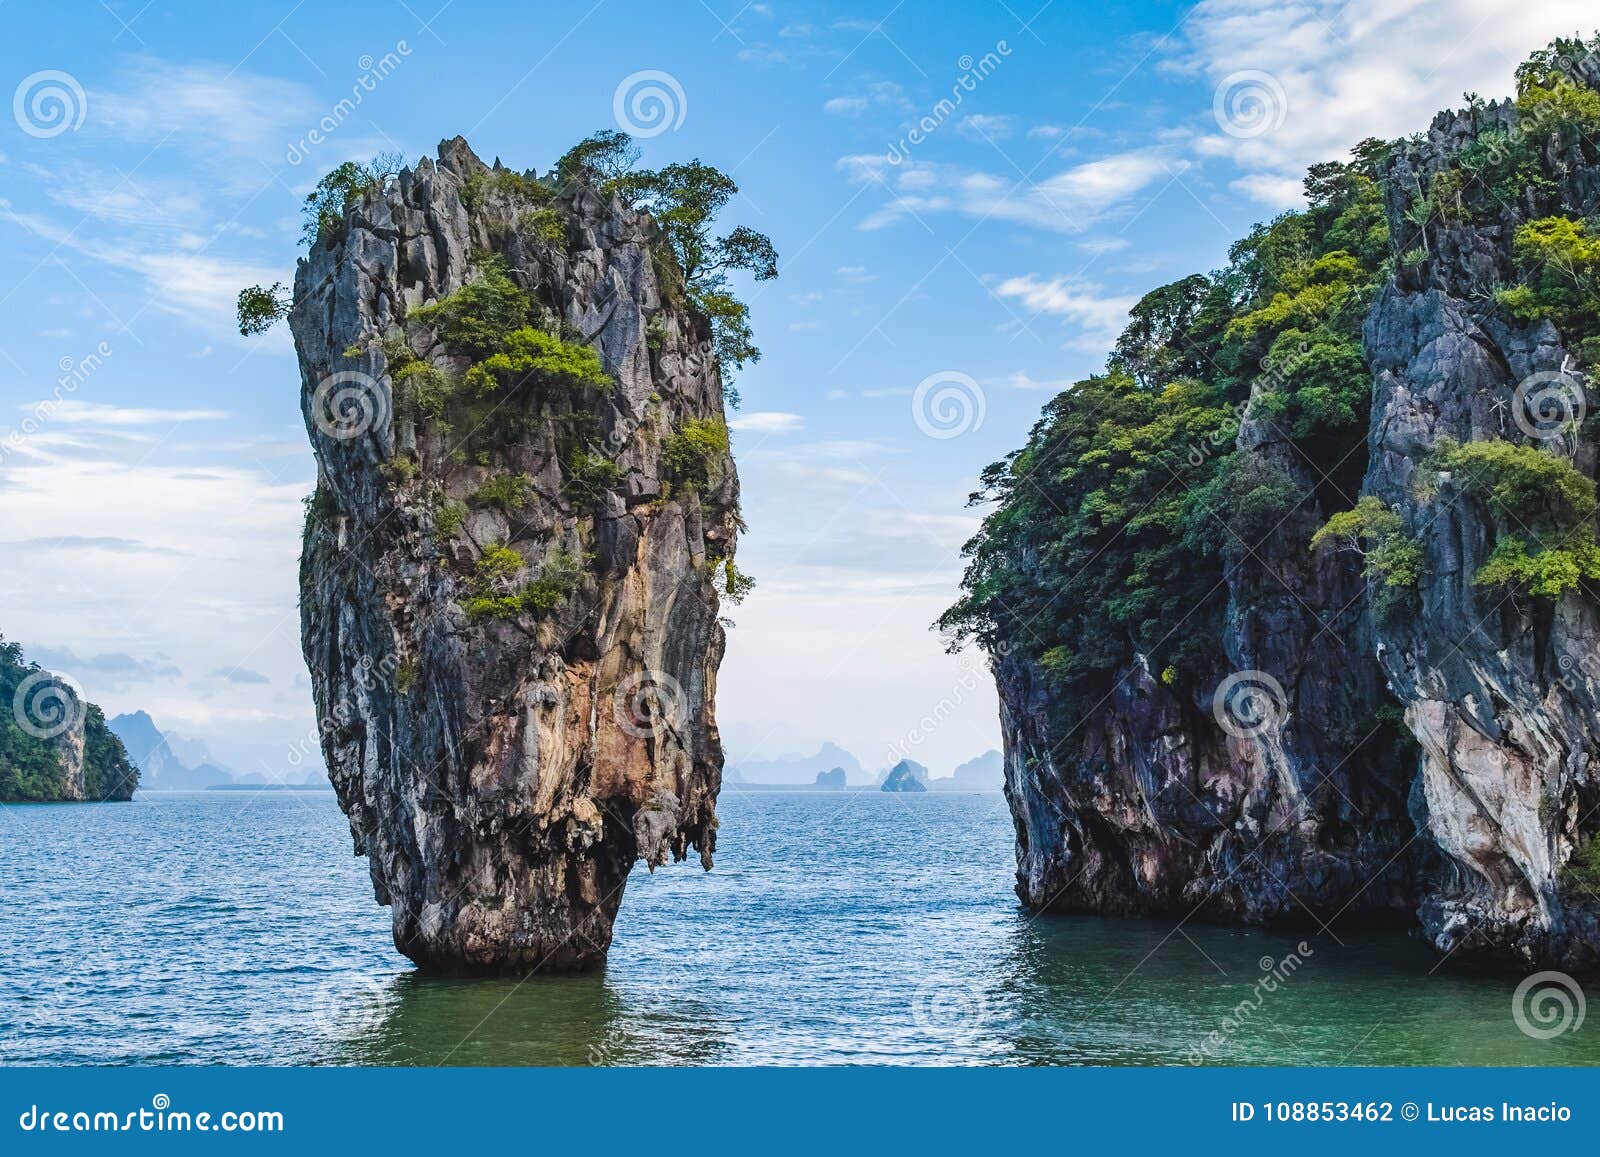 Girl in Front of Iconic Island in Phang Nga Bay, Thailand Stock Photo ...